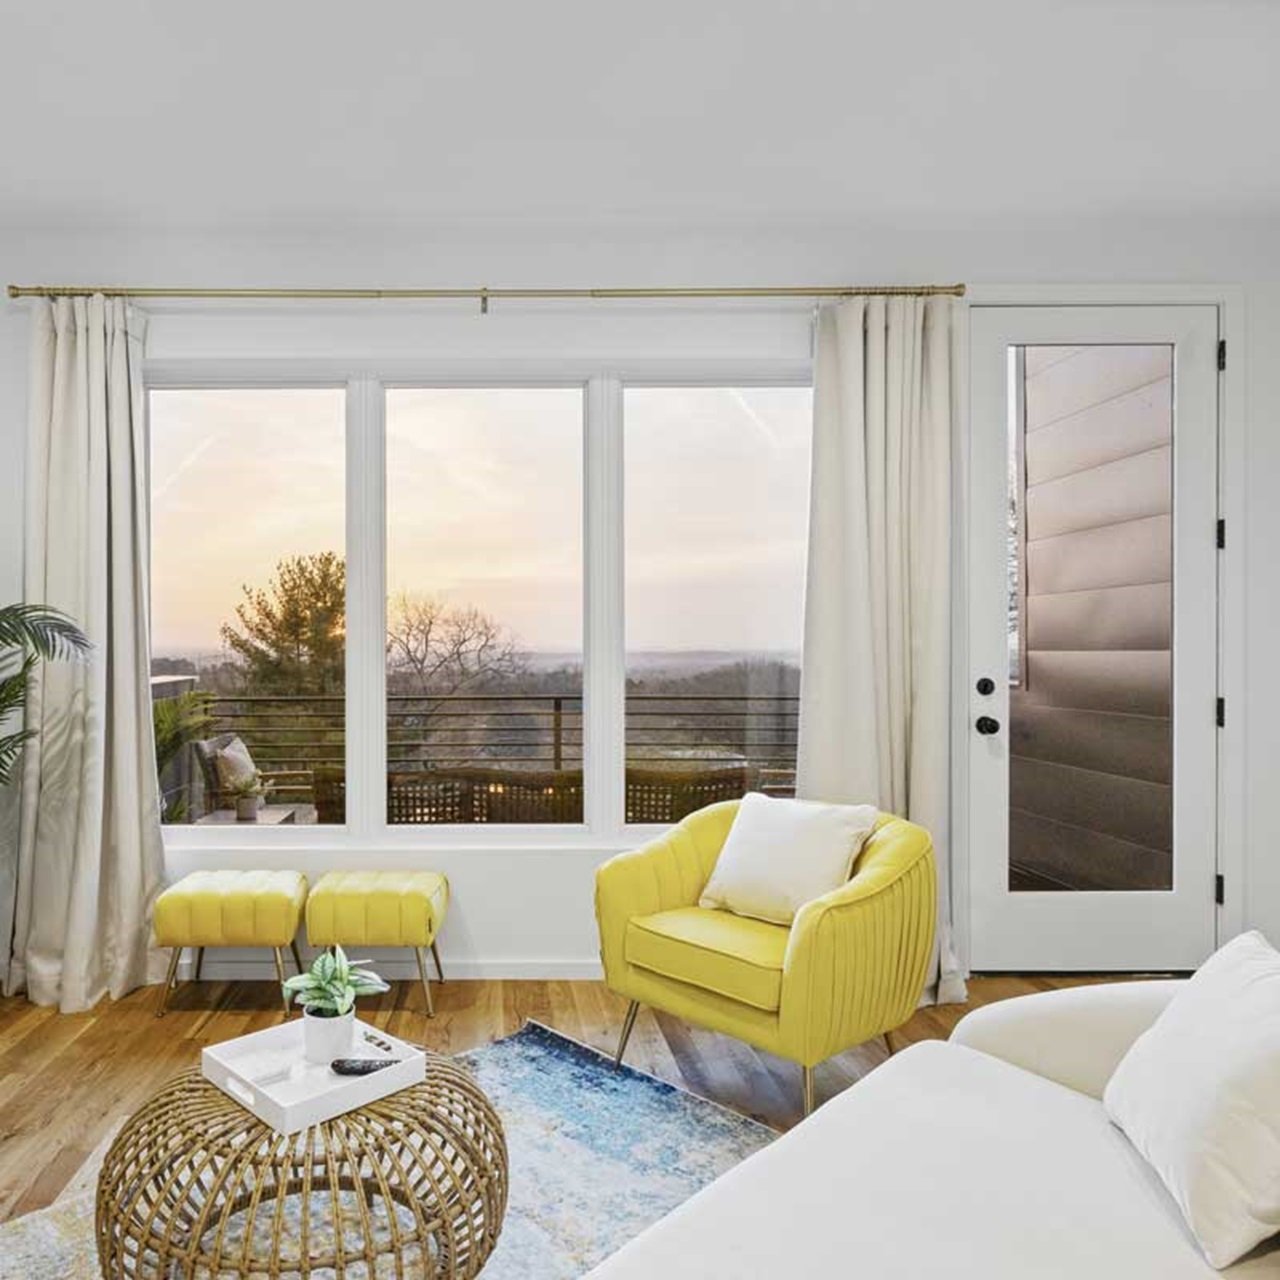 A modern living room with an Essential casement picture window overlooking a sunset